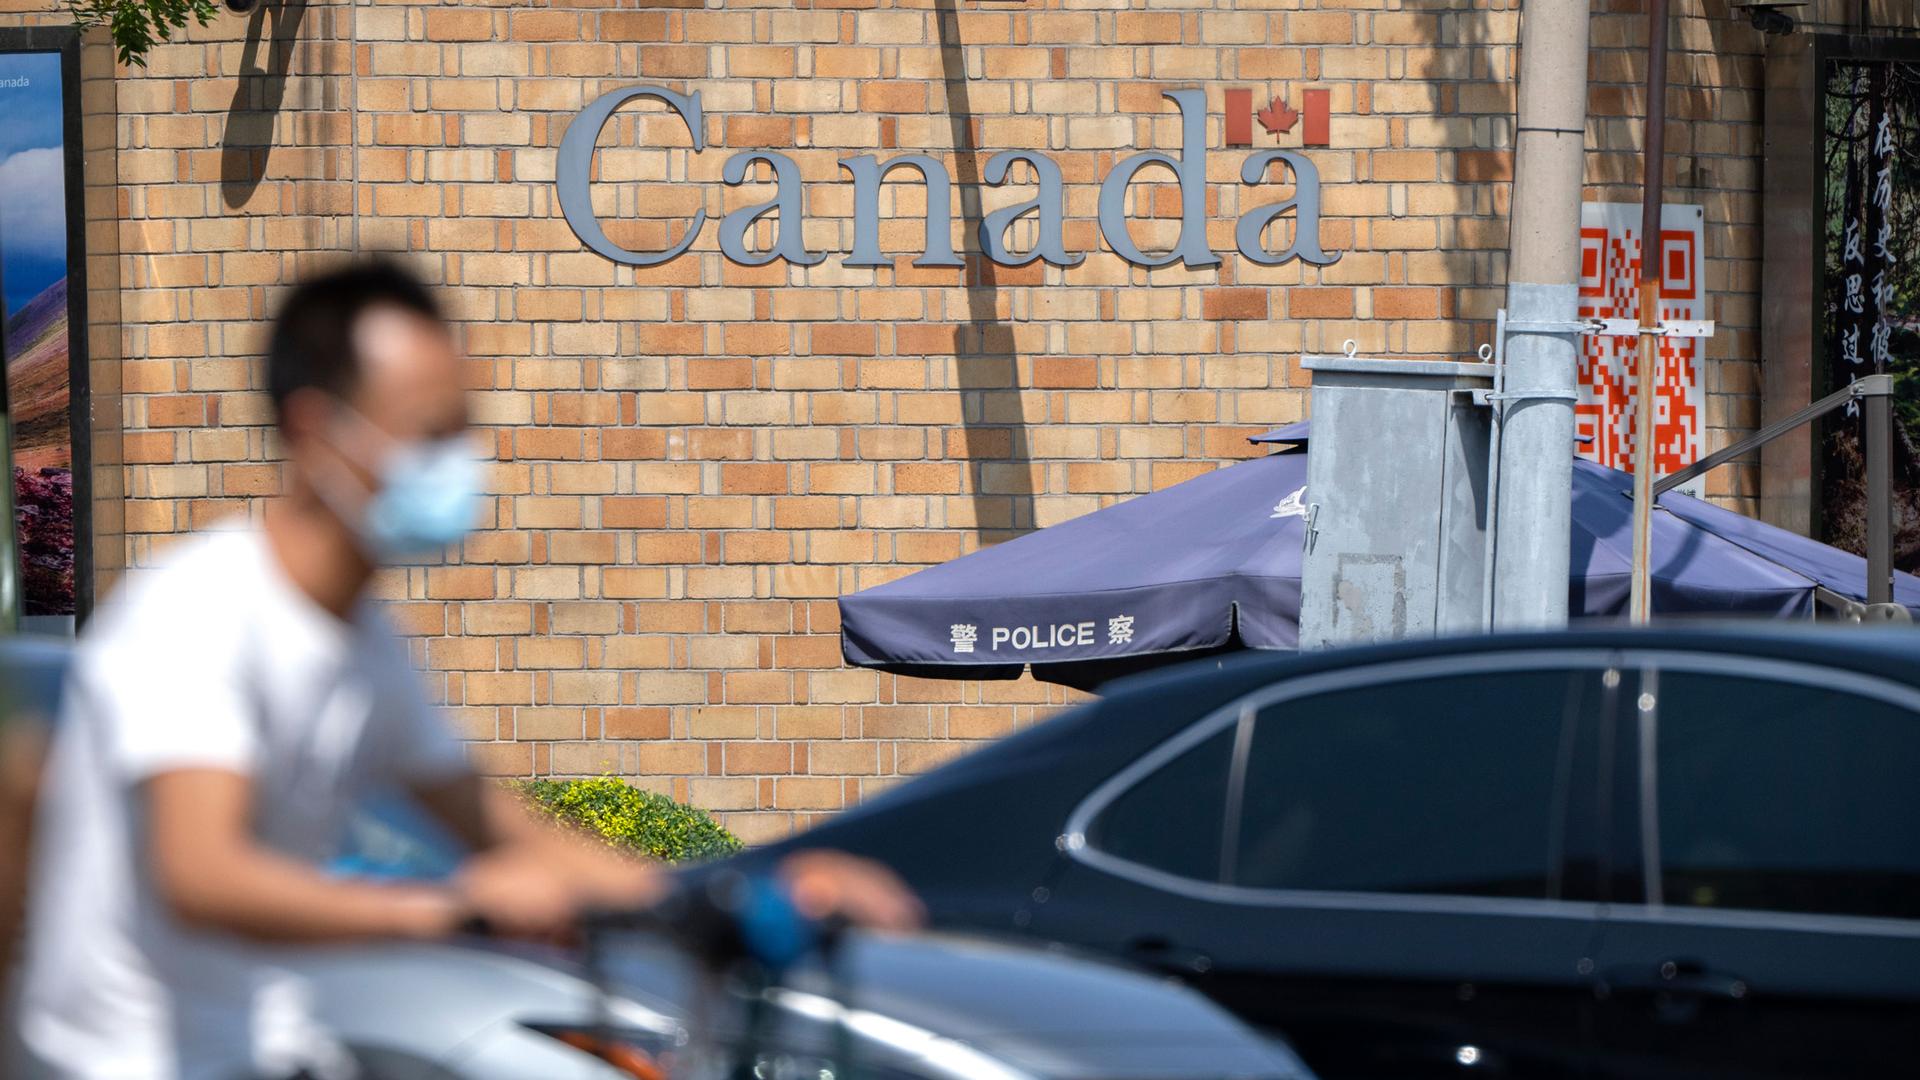 A man is shown riding a scooter in blurred focus while wearing a facemask with the brick facade of the Canadian embassy building in the distance.